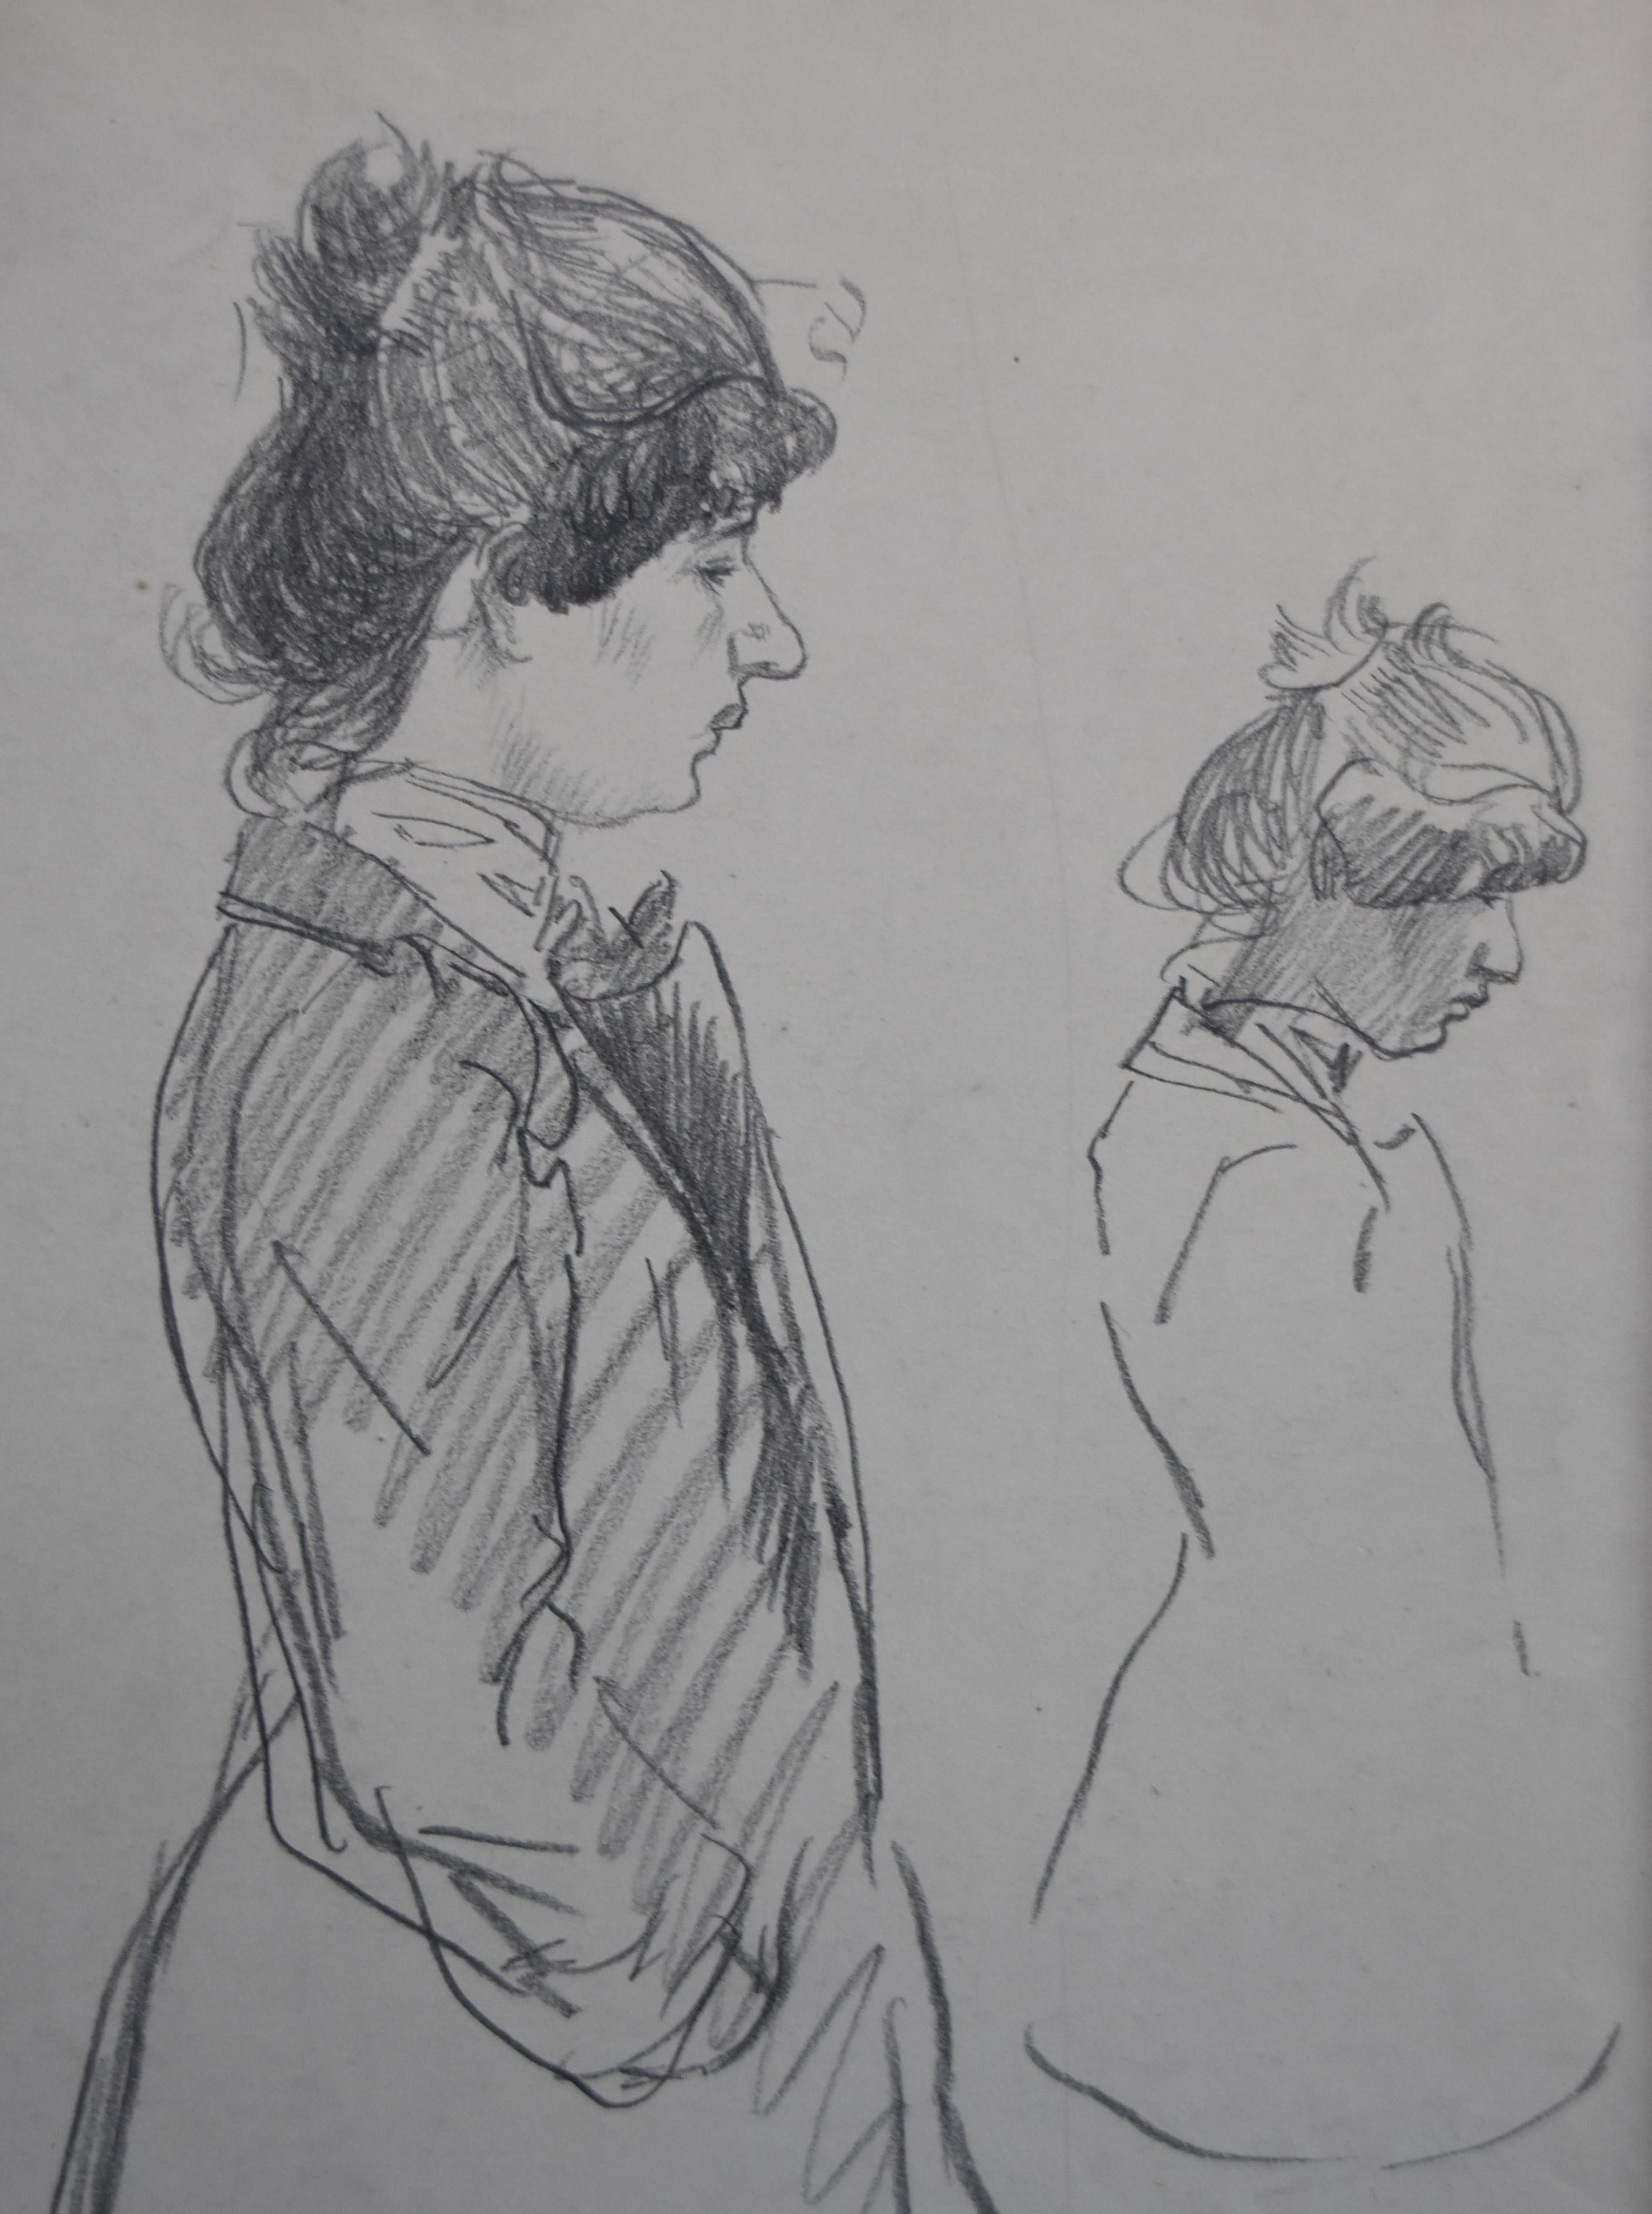 Theophile Alexandre Steinlen (1859-1923) 
Two studies of a woman viewed from profile
Charcoal on paper
Bears the estate stamp 